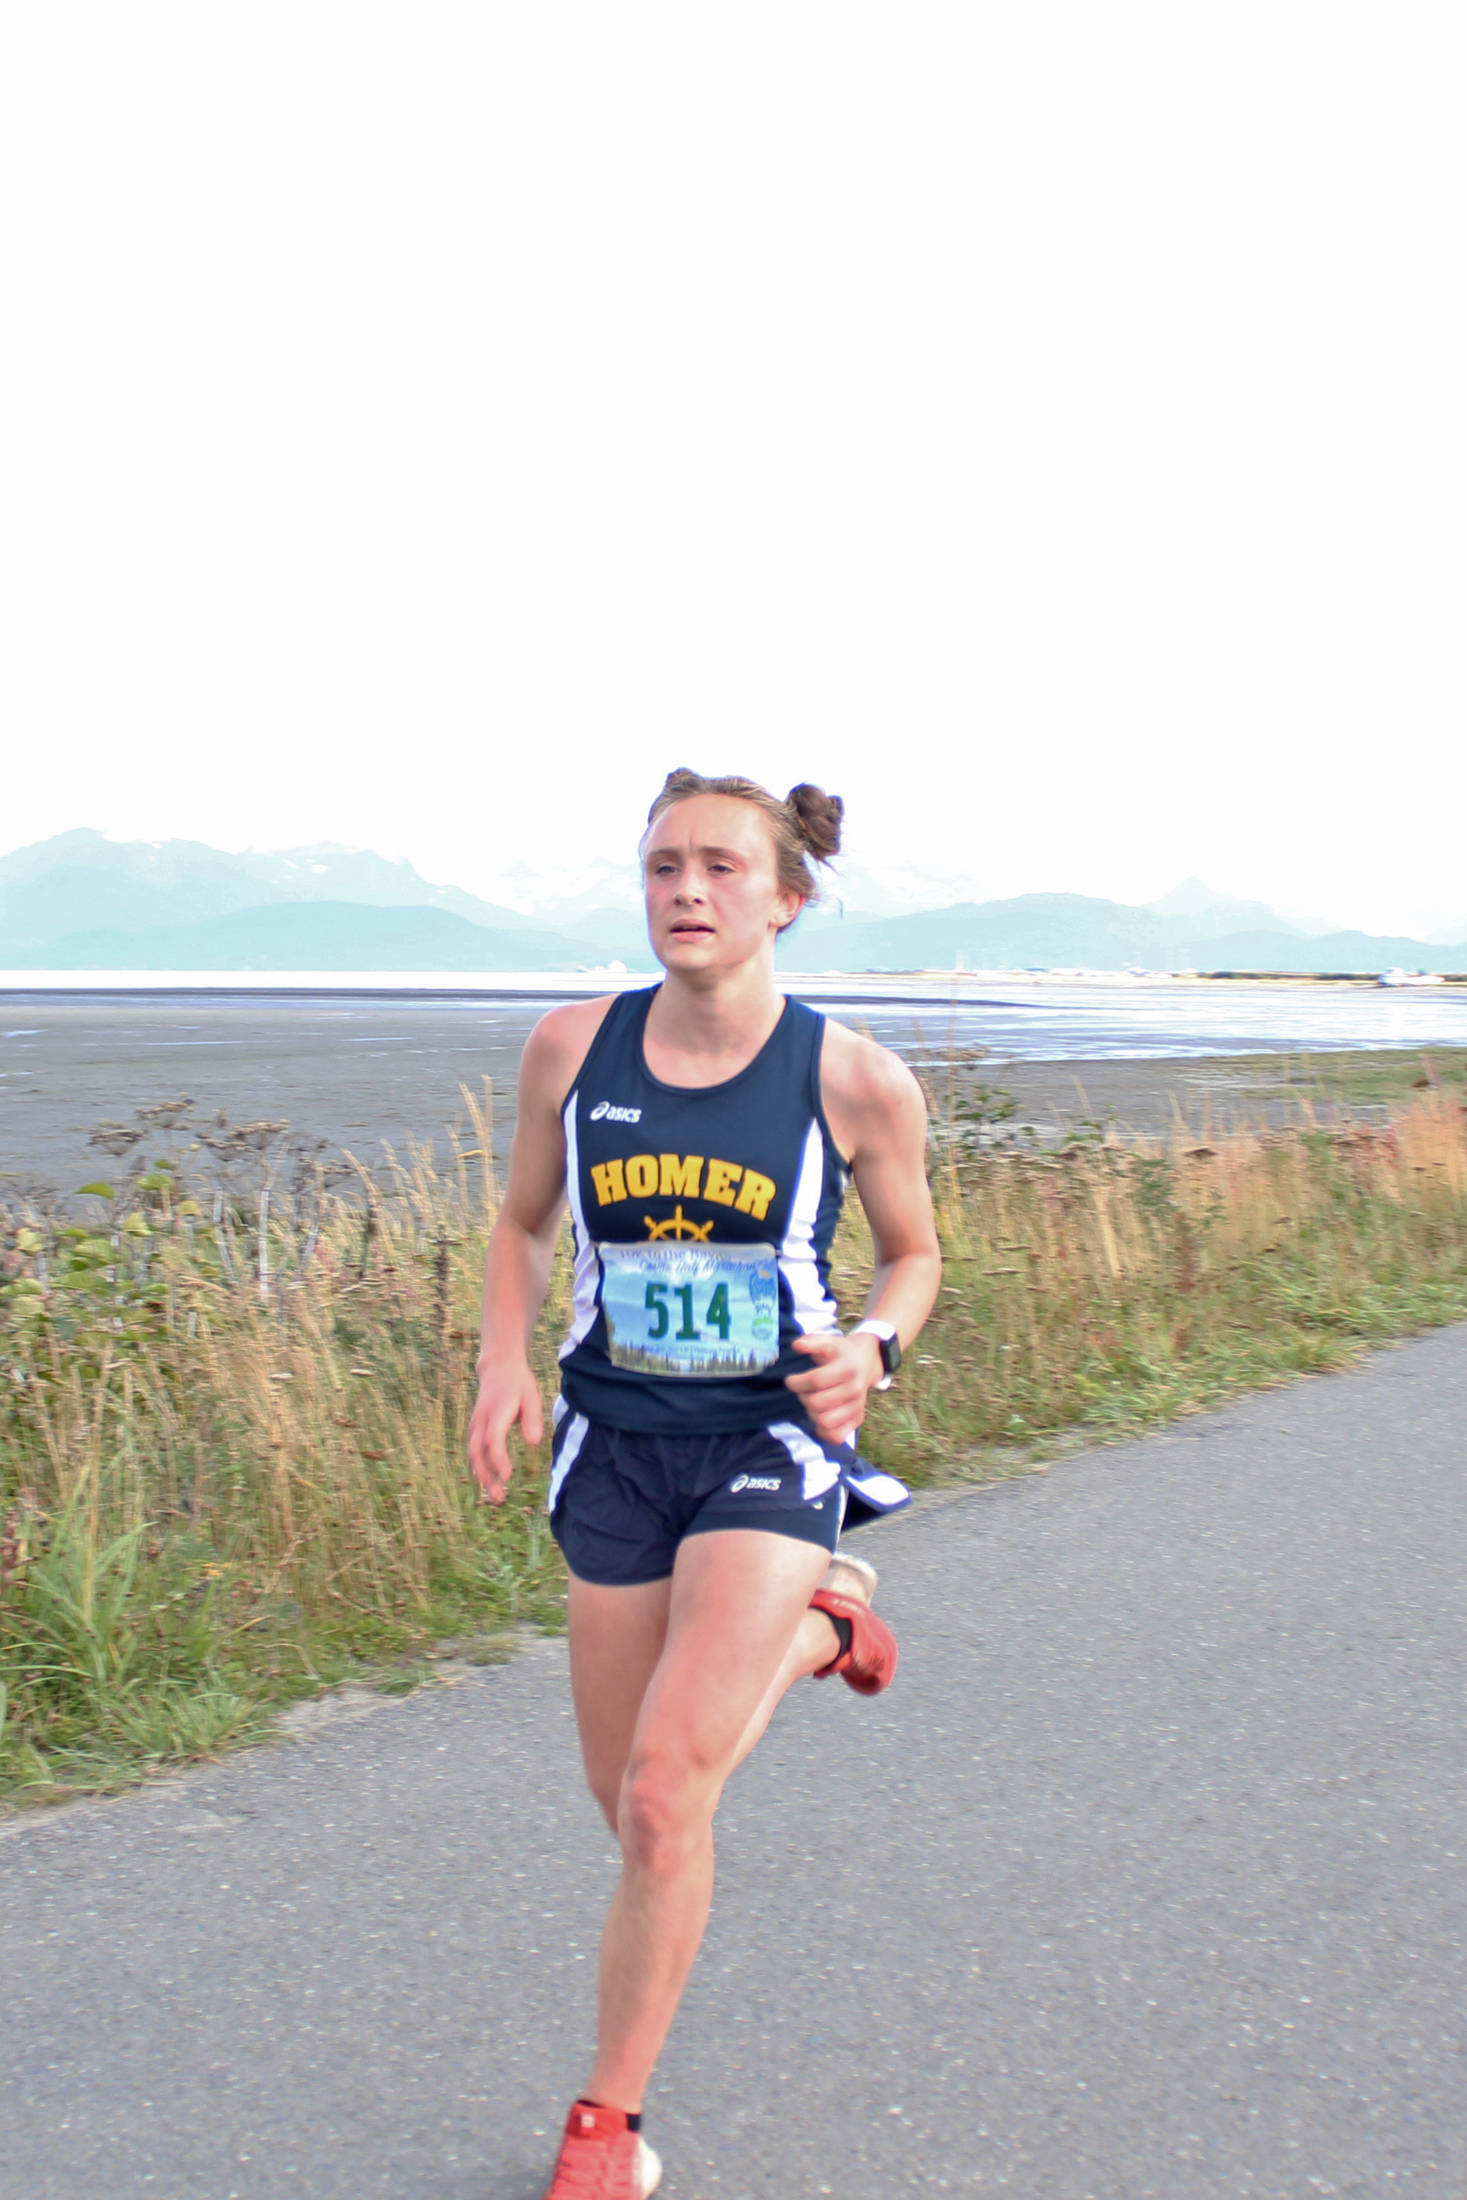 Homer’s Autumn Daigle reaches the finish line of the 5K girls race to win the Homer Invitational cross-country meet Friday, Sept. 7, 2018 on the Homer Spit in Homer, Alaska. (Photo by Megan Pacer/Homer News)